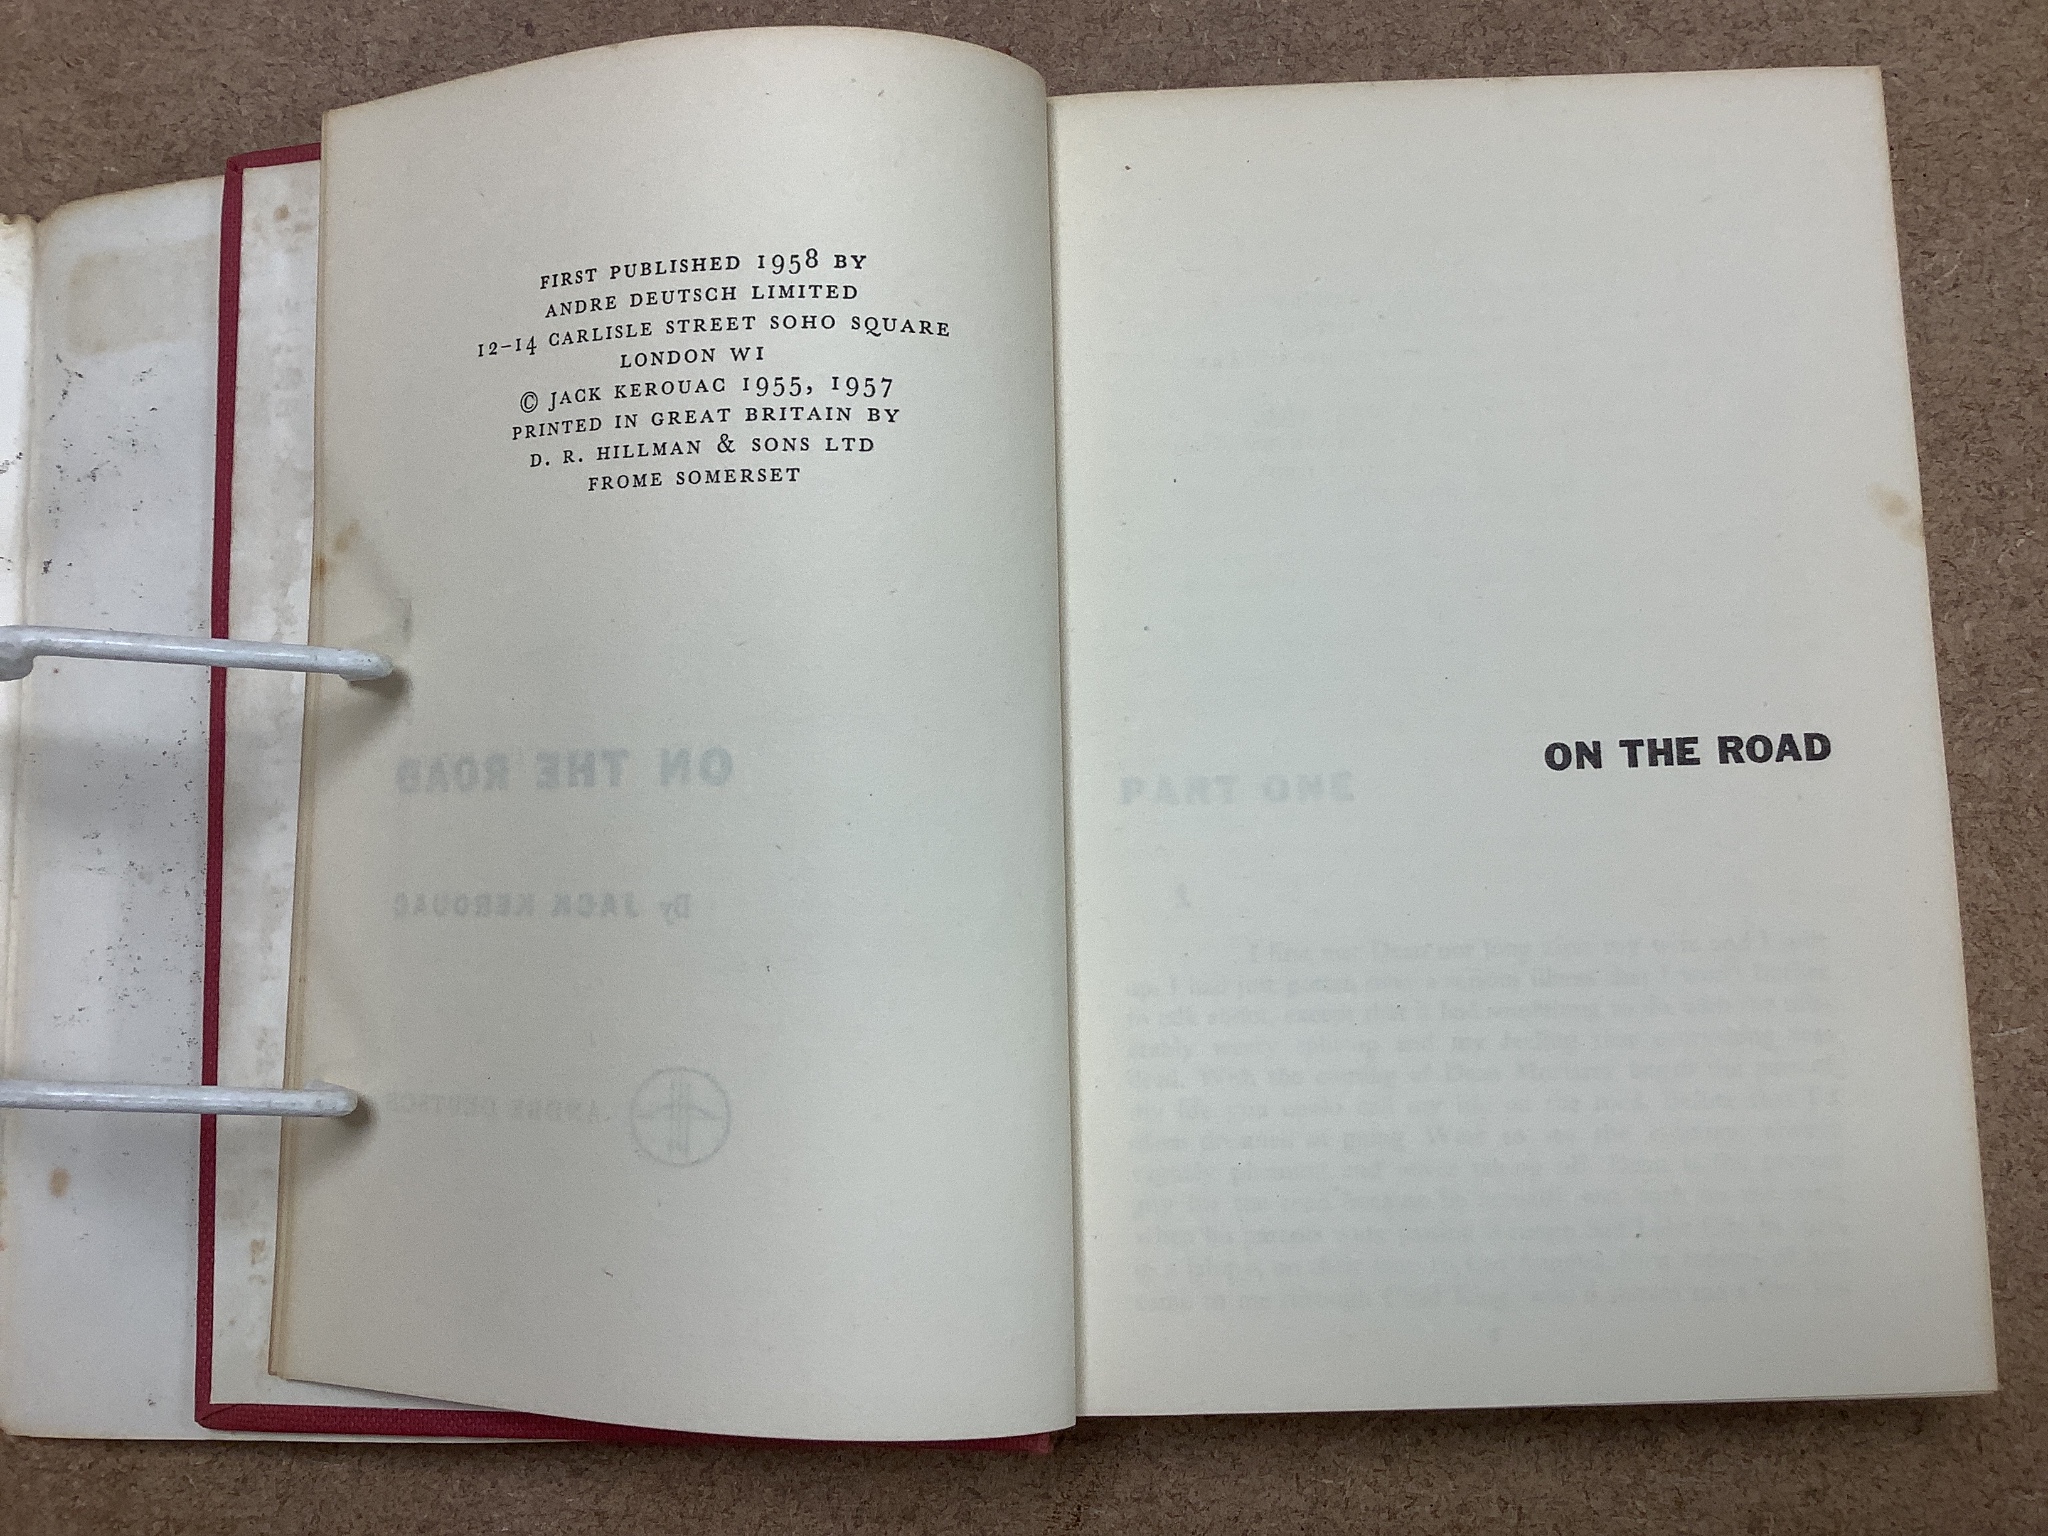 Kerouac, Jack - 3 works - On The Road, 1st English edition, original cloth with unclipped d/j, London, 1958; The Town and the City, 1st UK edition, original cloth with unclipped d/j , ragged and with loss to head of spin